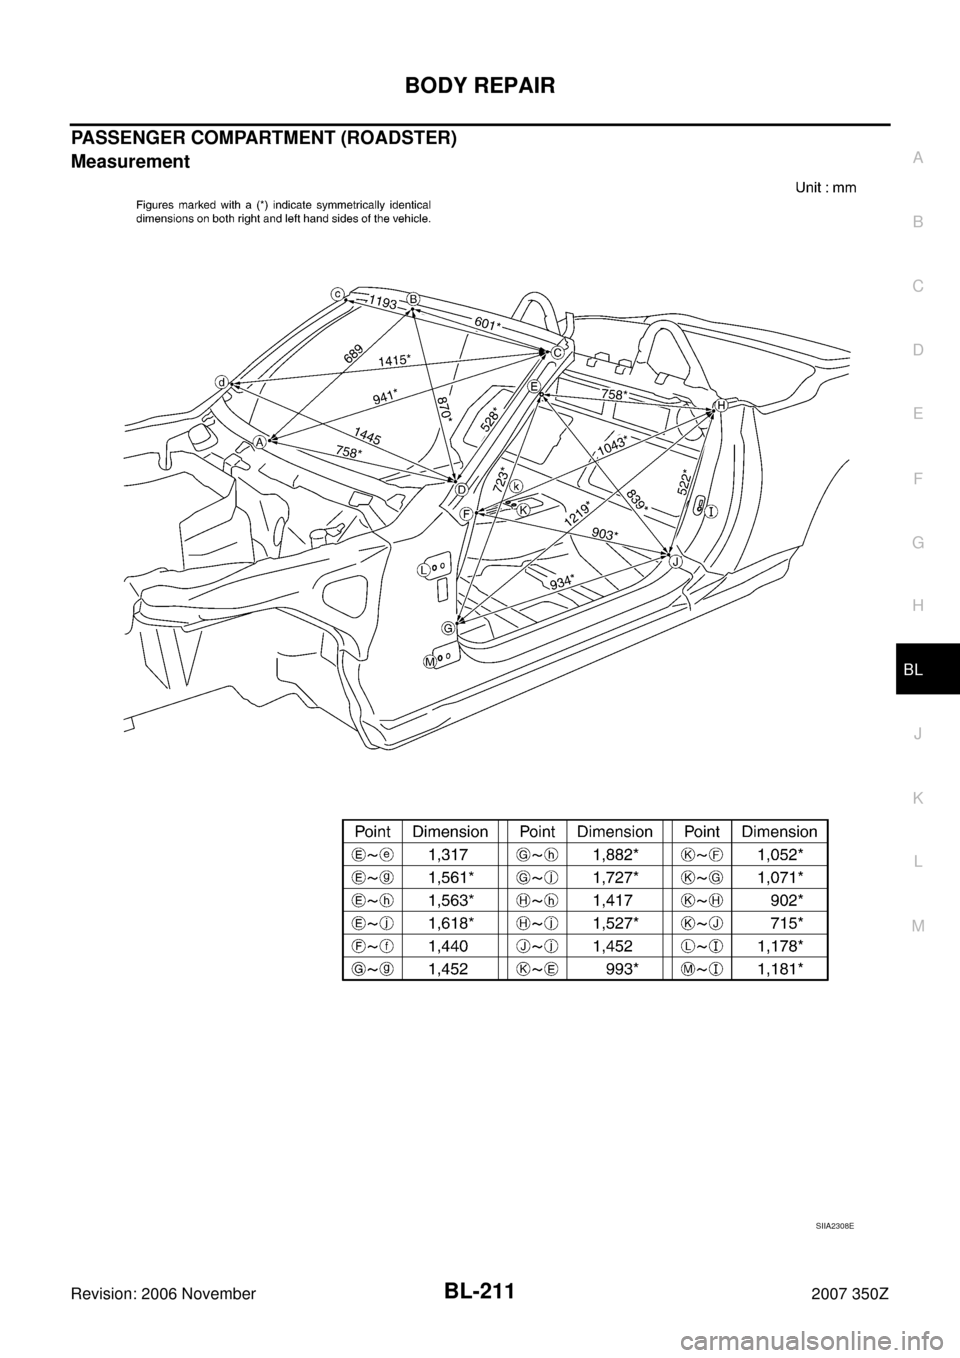 NISSAN 350Z 2007 Z33 Body, Lock And Security System Workshop Manual BODY REPAIR
BL-211
C
D
E
F
G
H
J
K
L
MA
B
BL
Revision: 2006 November2007 350Z
PASSENGER COMPARTMENT (ROADSTER)
Measurement
SIIA2308E 